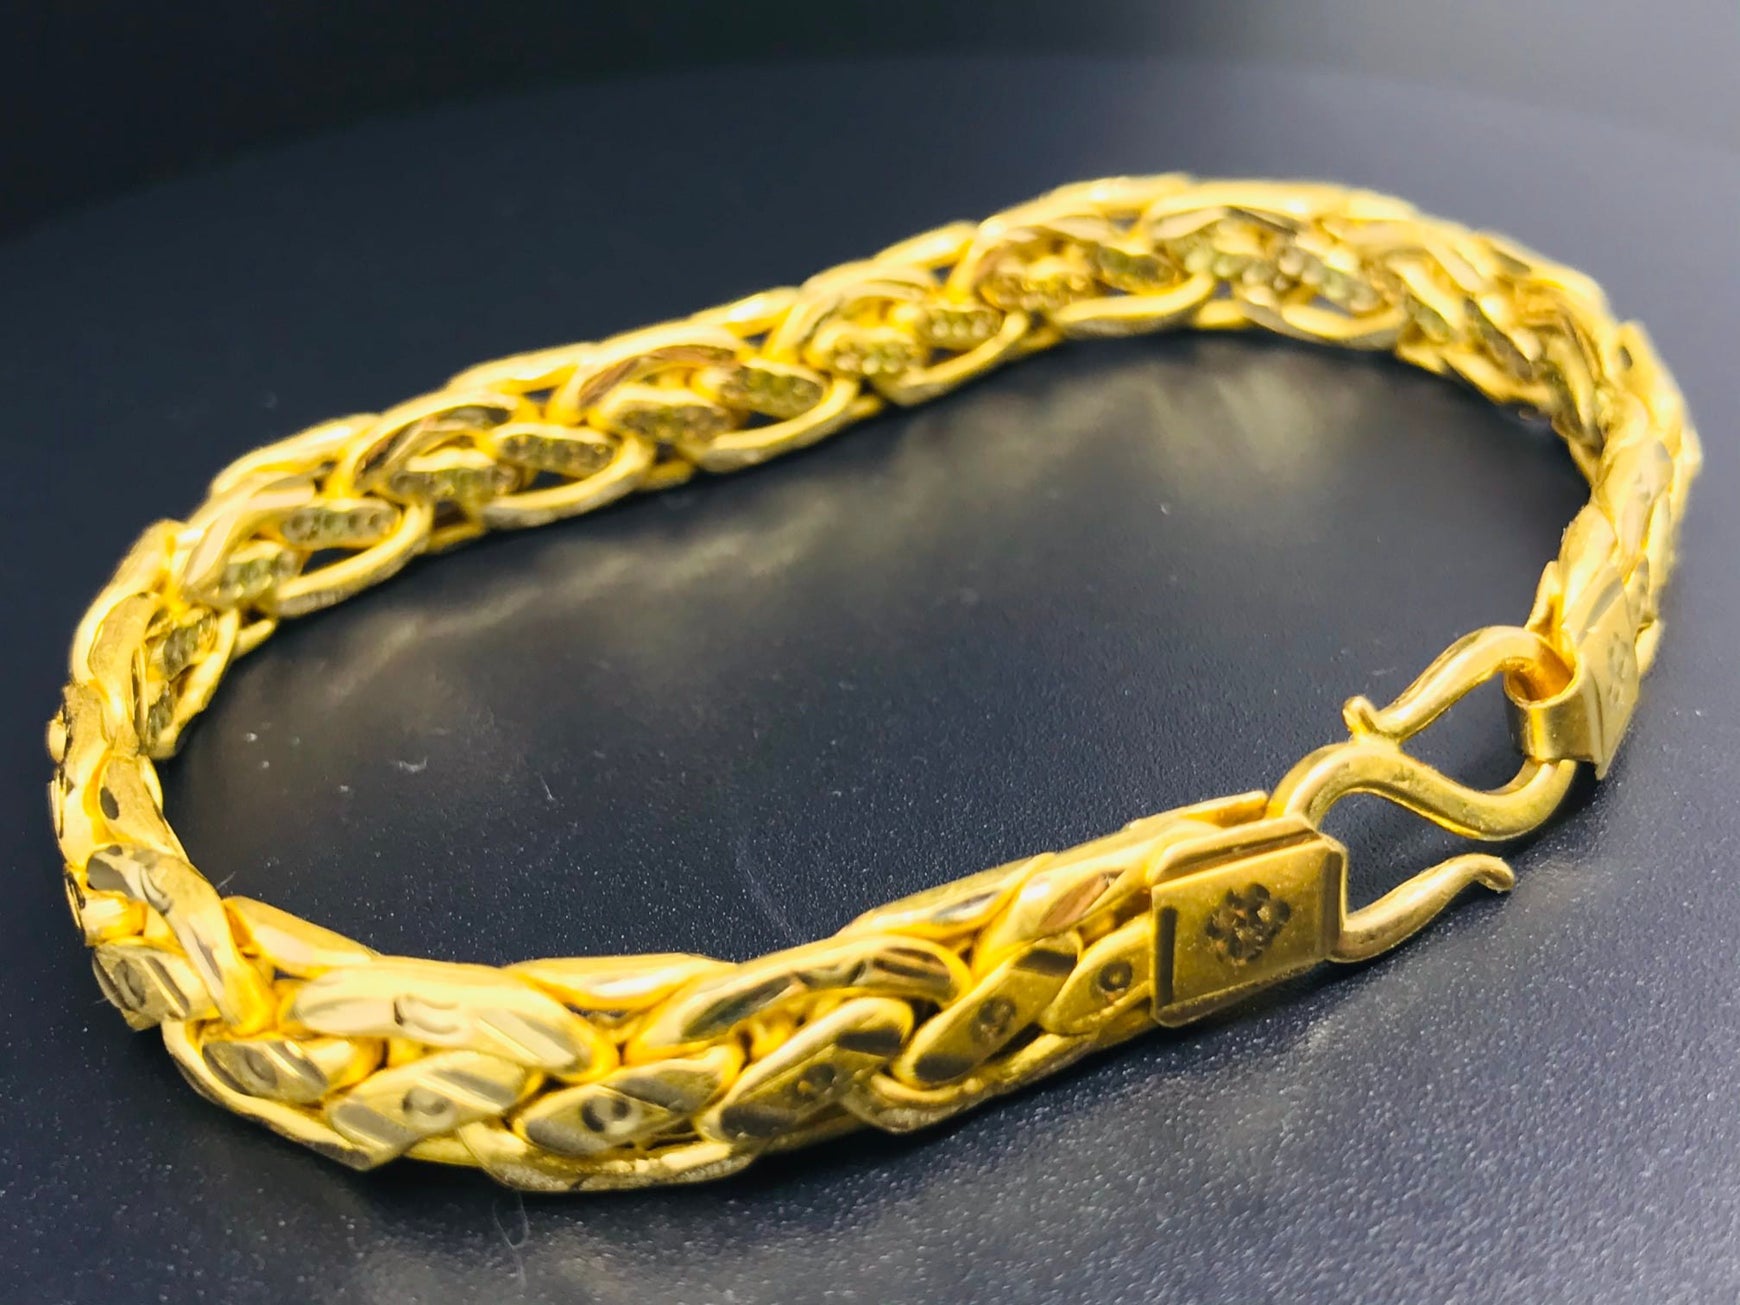 22CT gold / BIS 916 H M Bracelet Weight 8 to 10 Gms. Contact No. For more  details 6361212022 , 9113993129 @psg.gold Address PSG Gold L... | Instagram